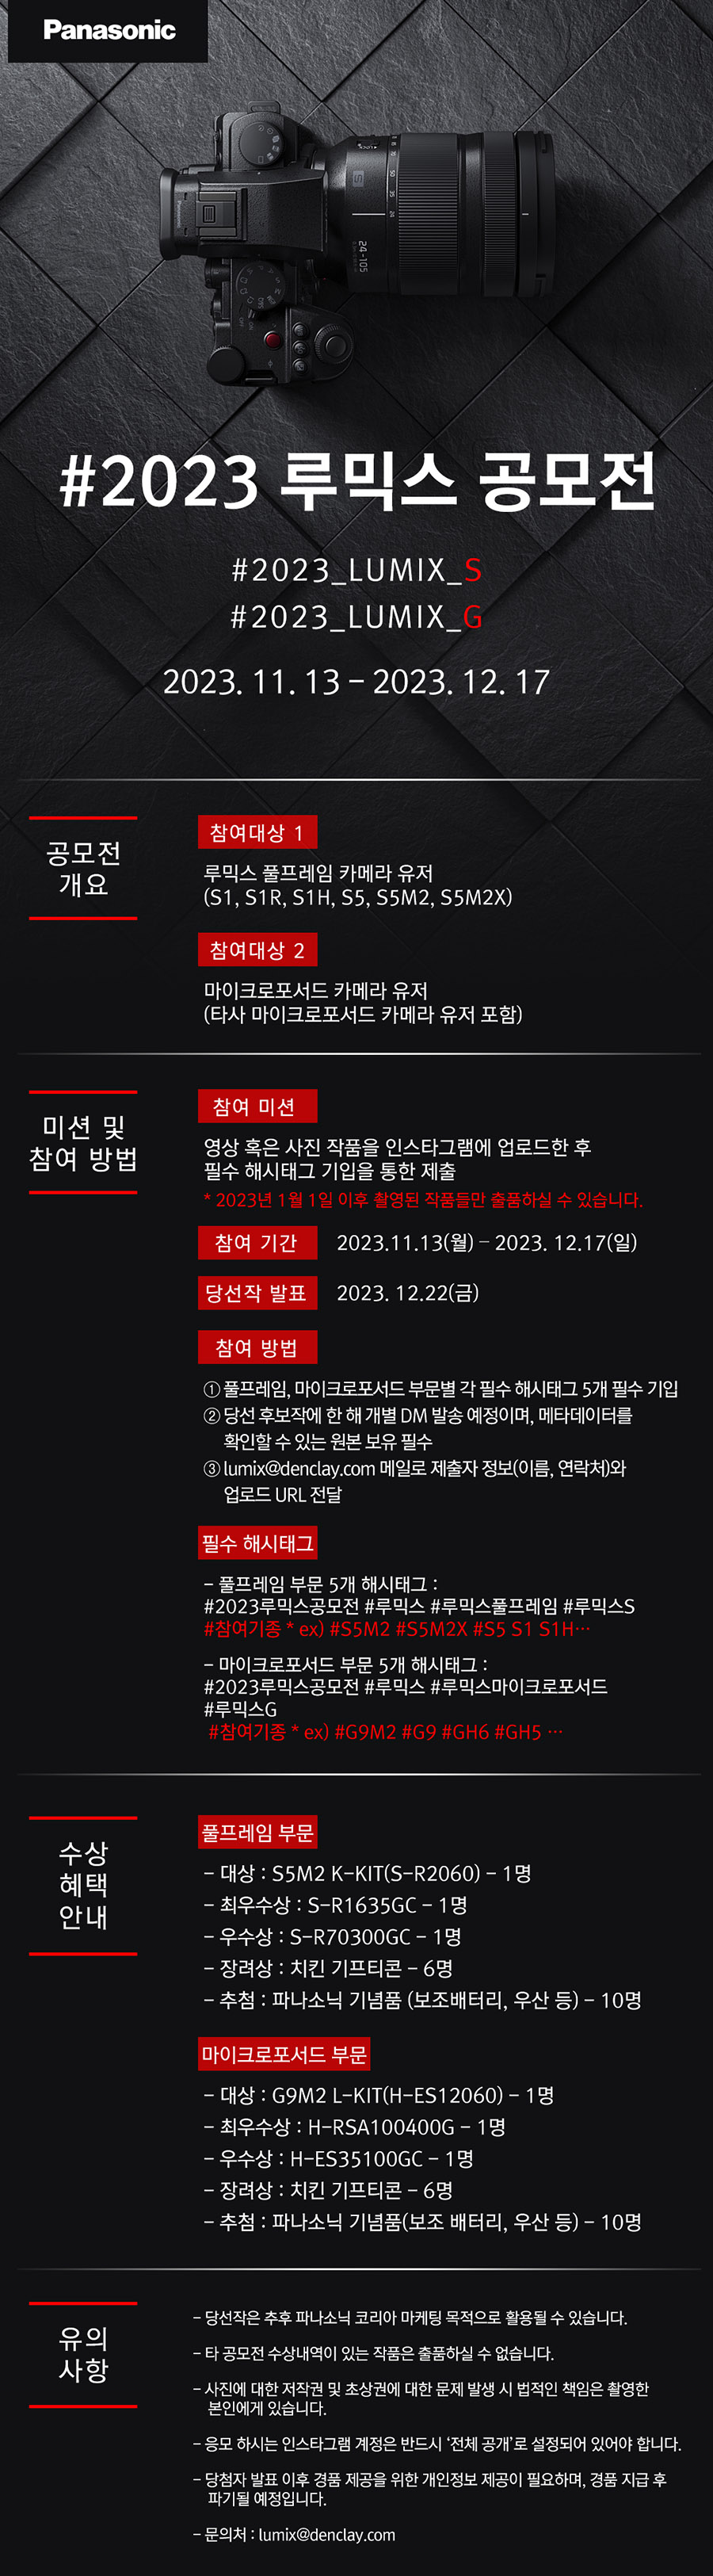 https://www.panasonic.co.kr/event/events_view.do?seq=76&tabcnt=tabcnt1